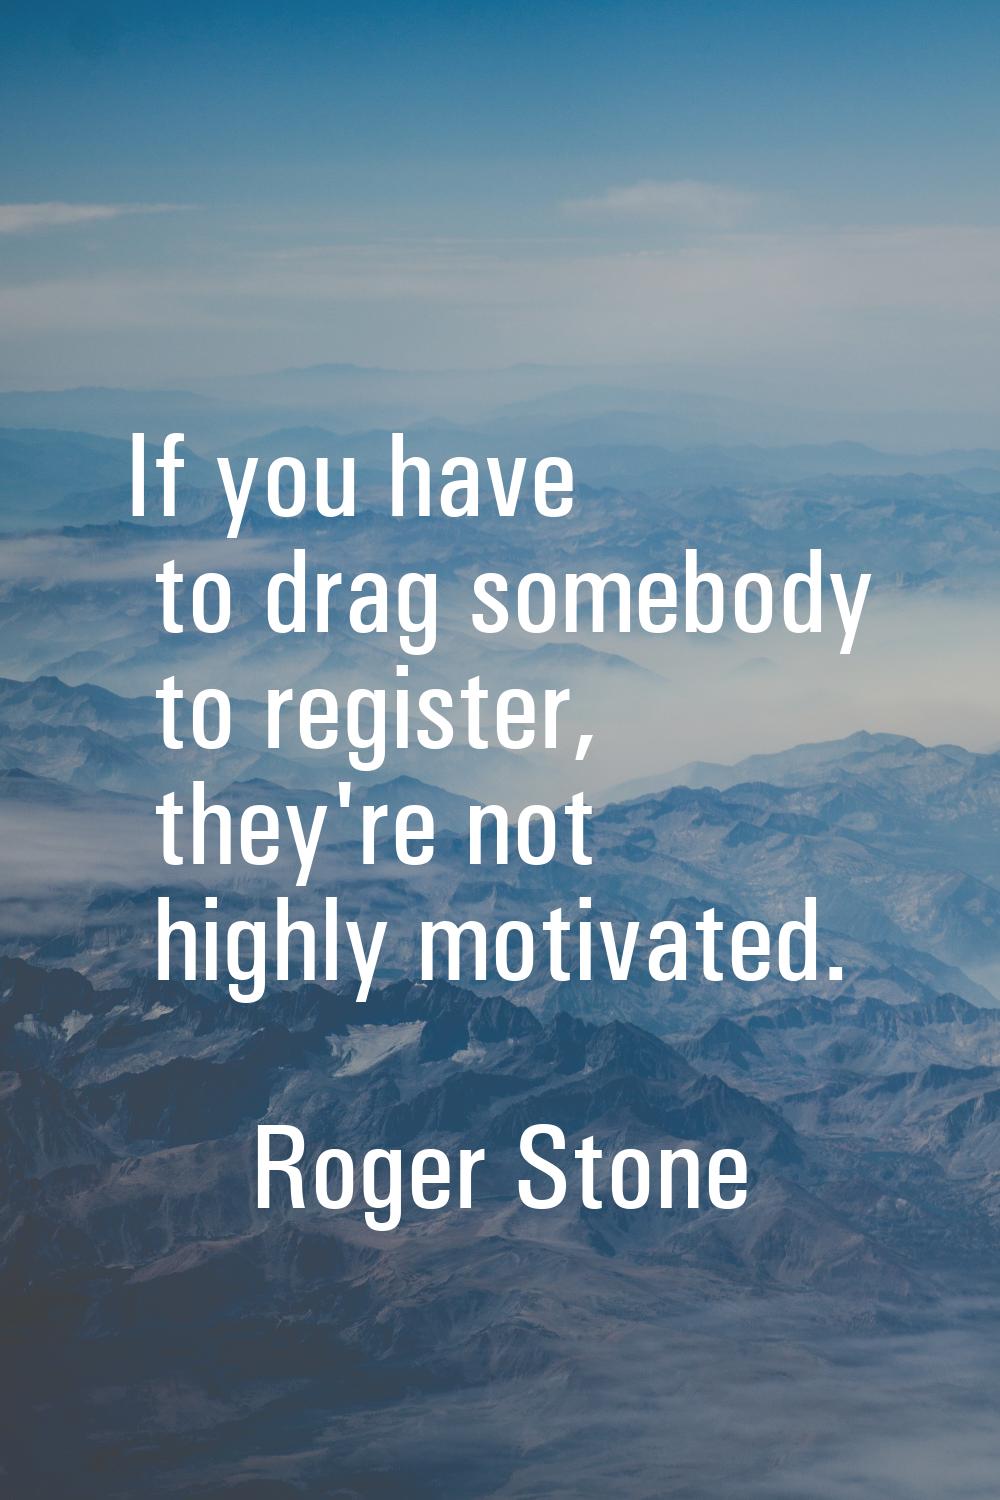 If you have to drag somebody to register, they're not highly motivated.